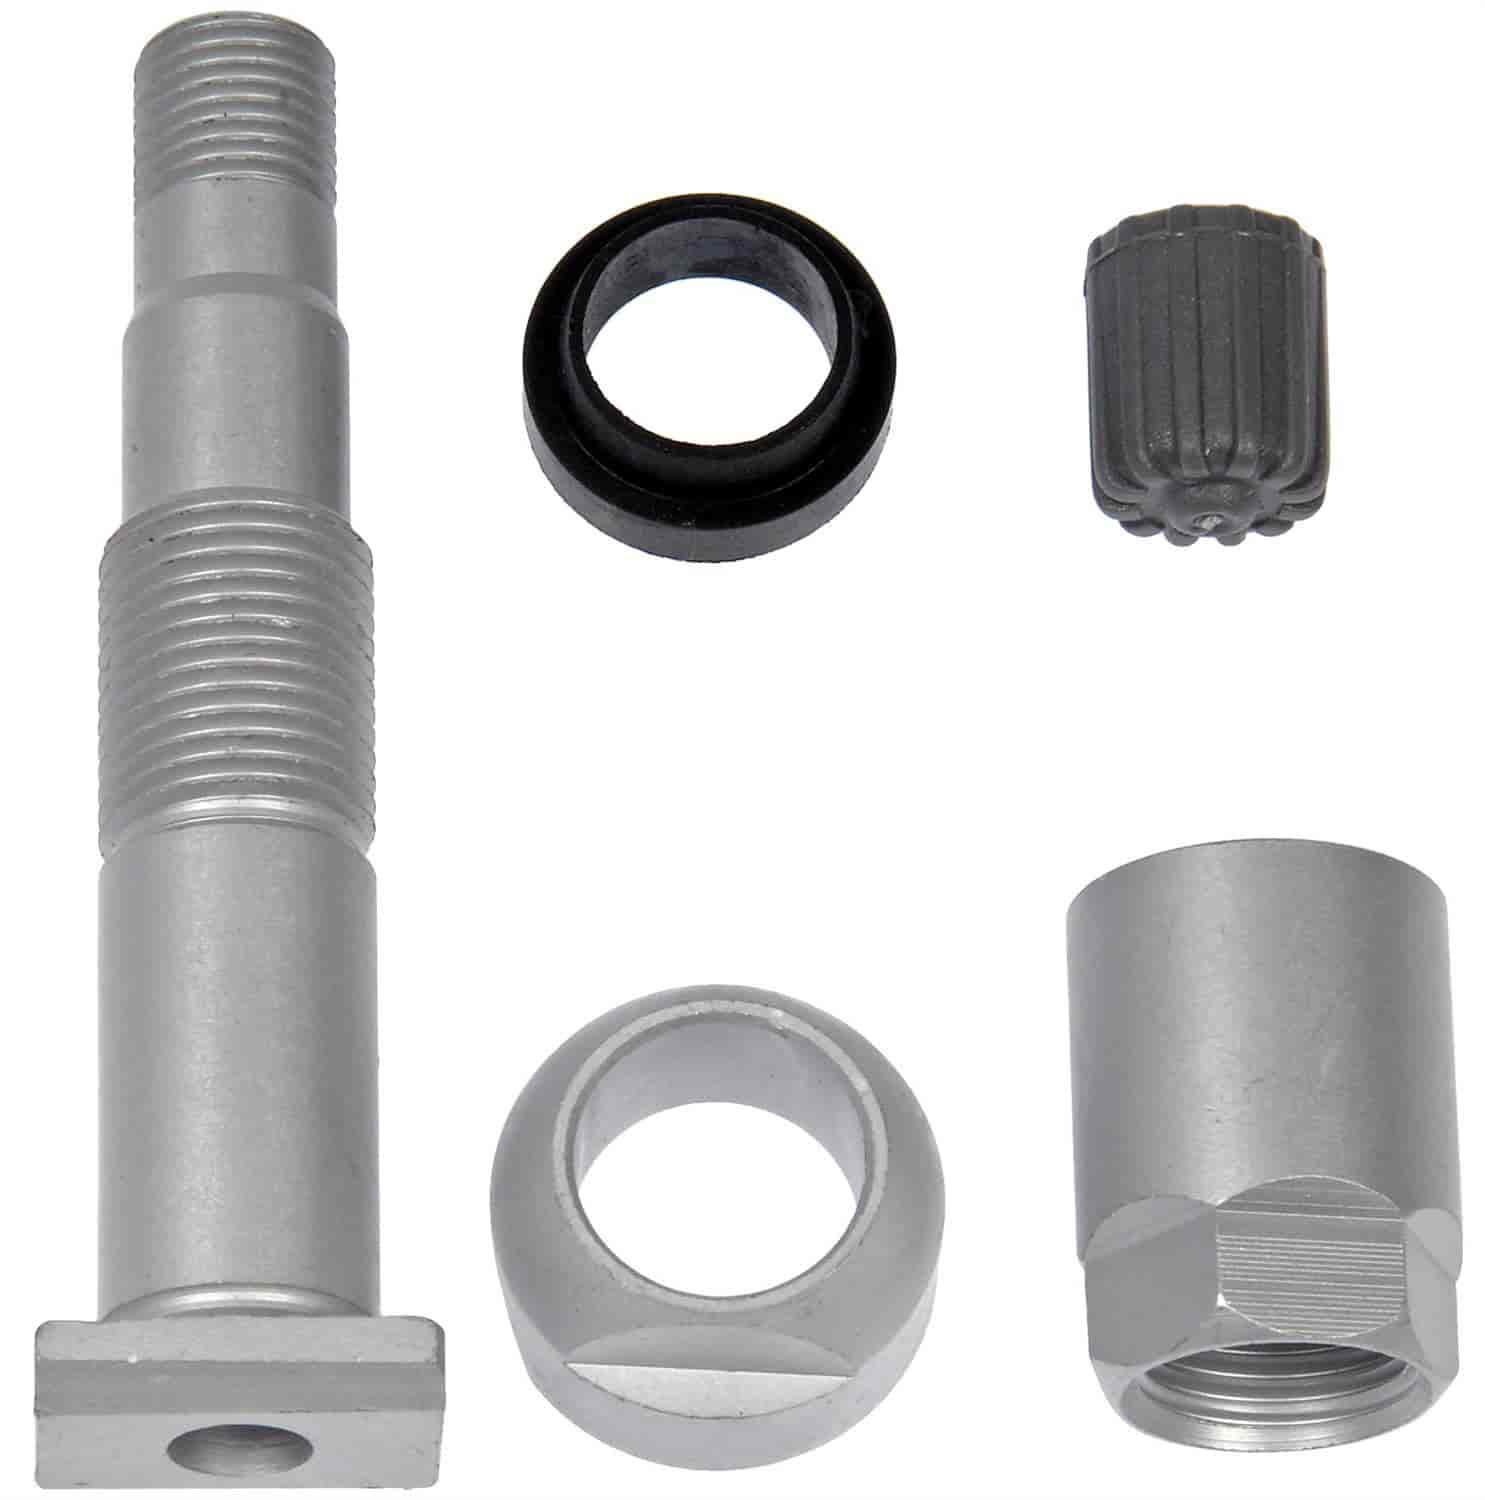 TPMS Service Kit - Replacement Valve Stem includes